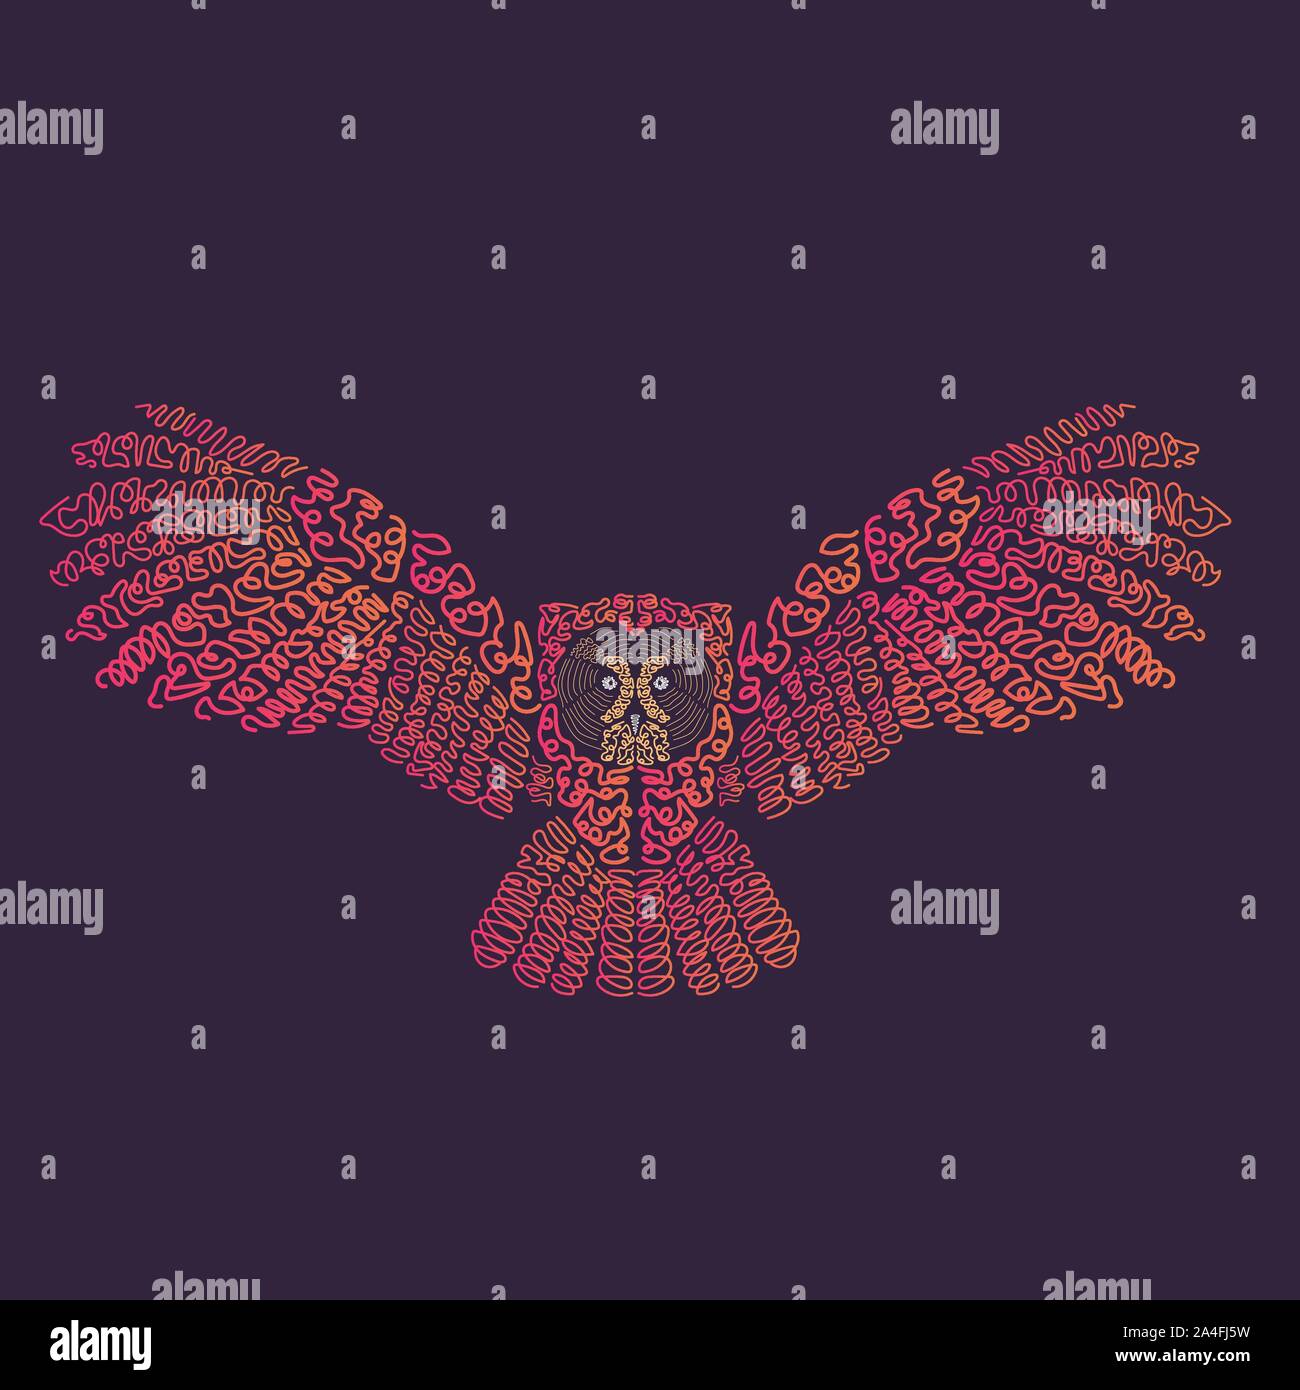 Hand drawn eagle owl. It can be used for print design. Vector illustration of eagle owl Stock Vector